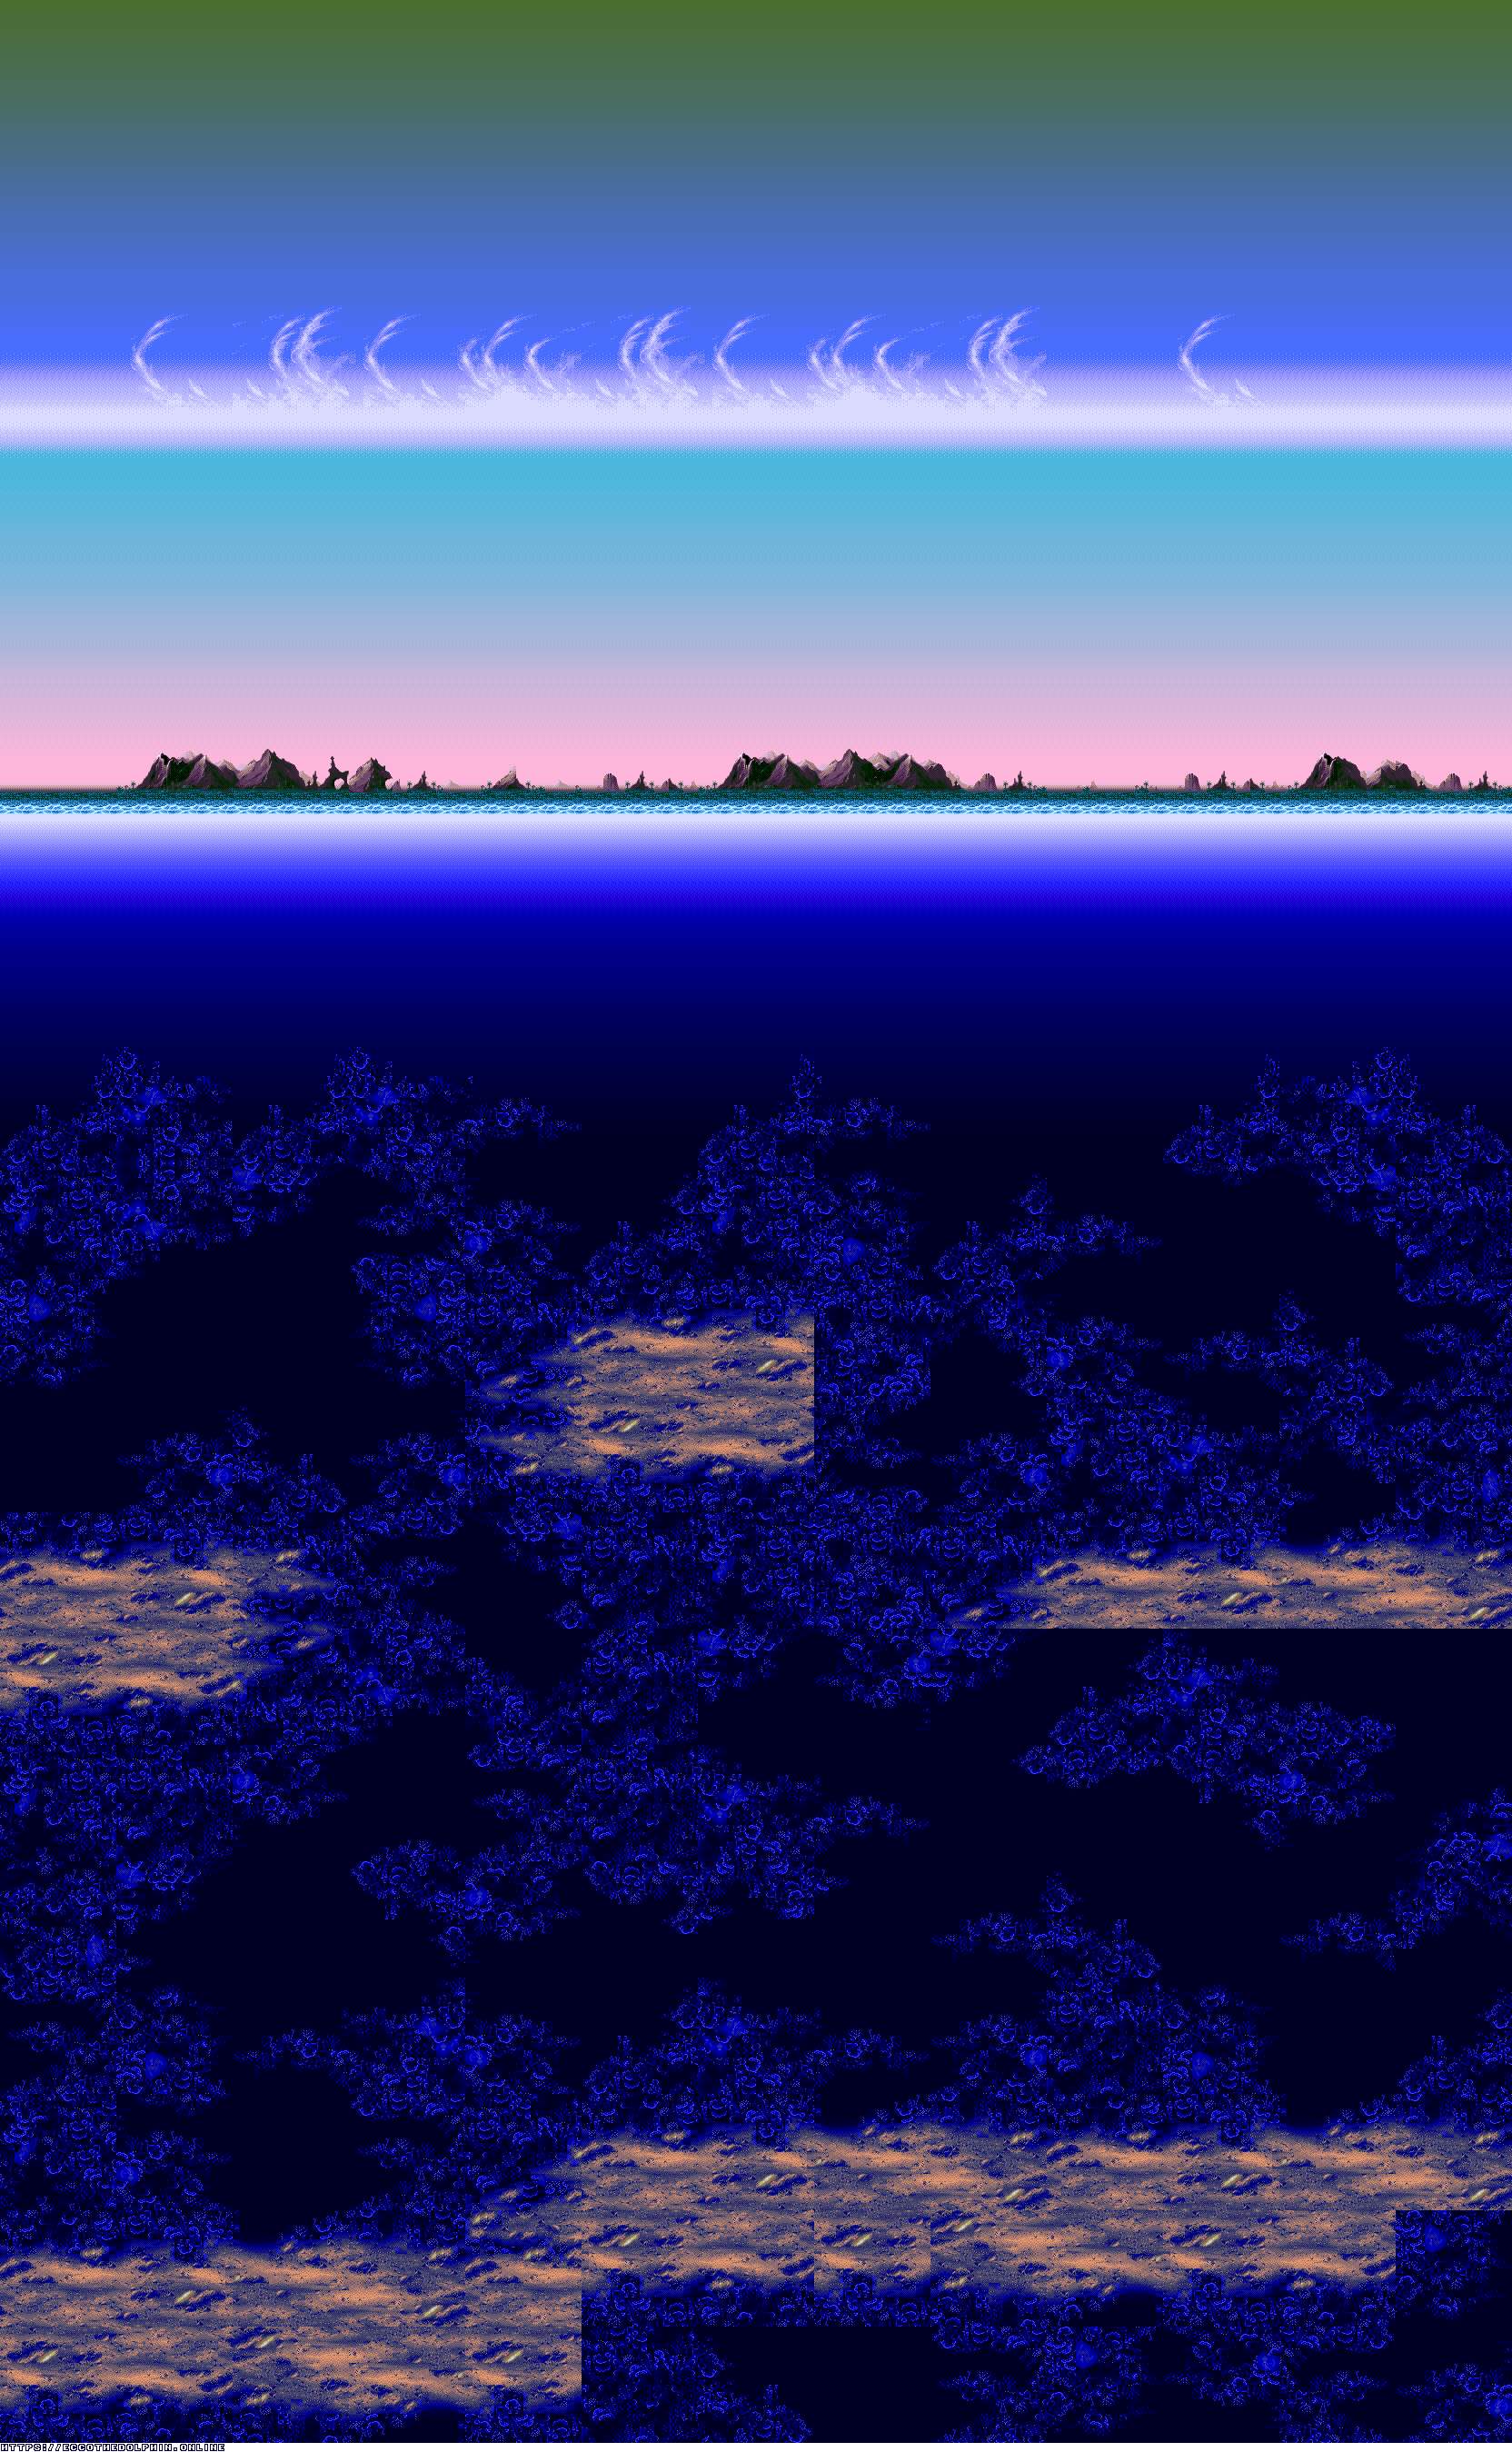 Ecco: The Tides of Time - Skyway (Background)